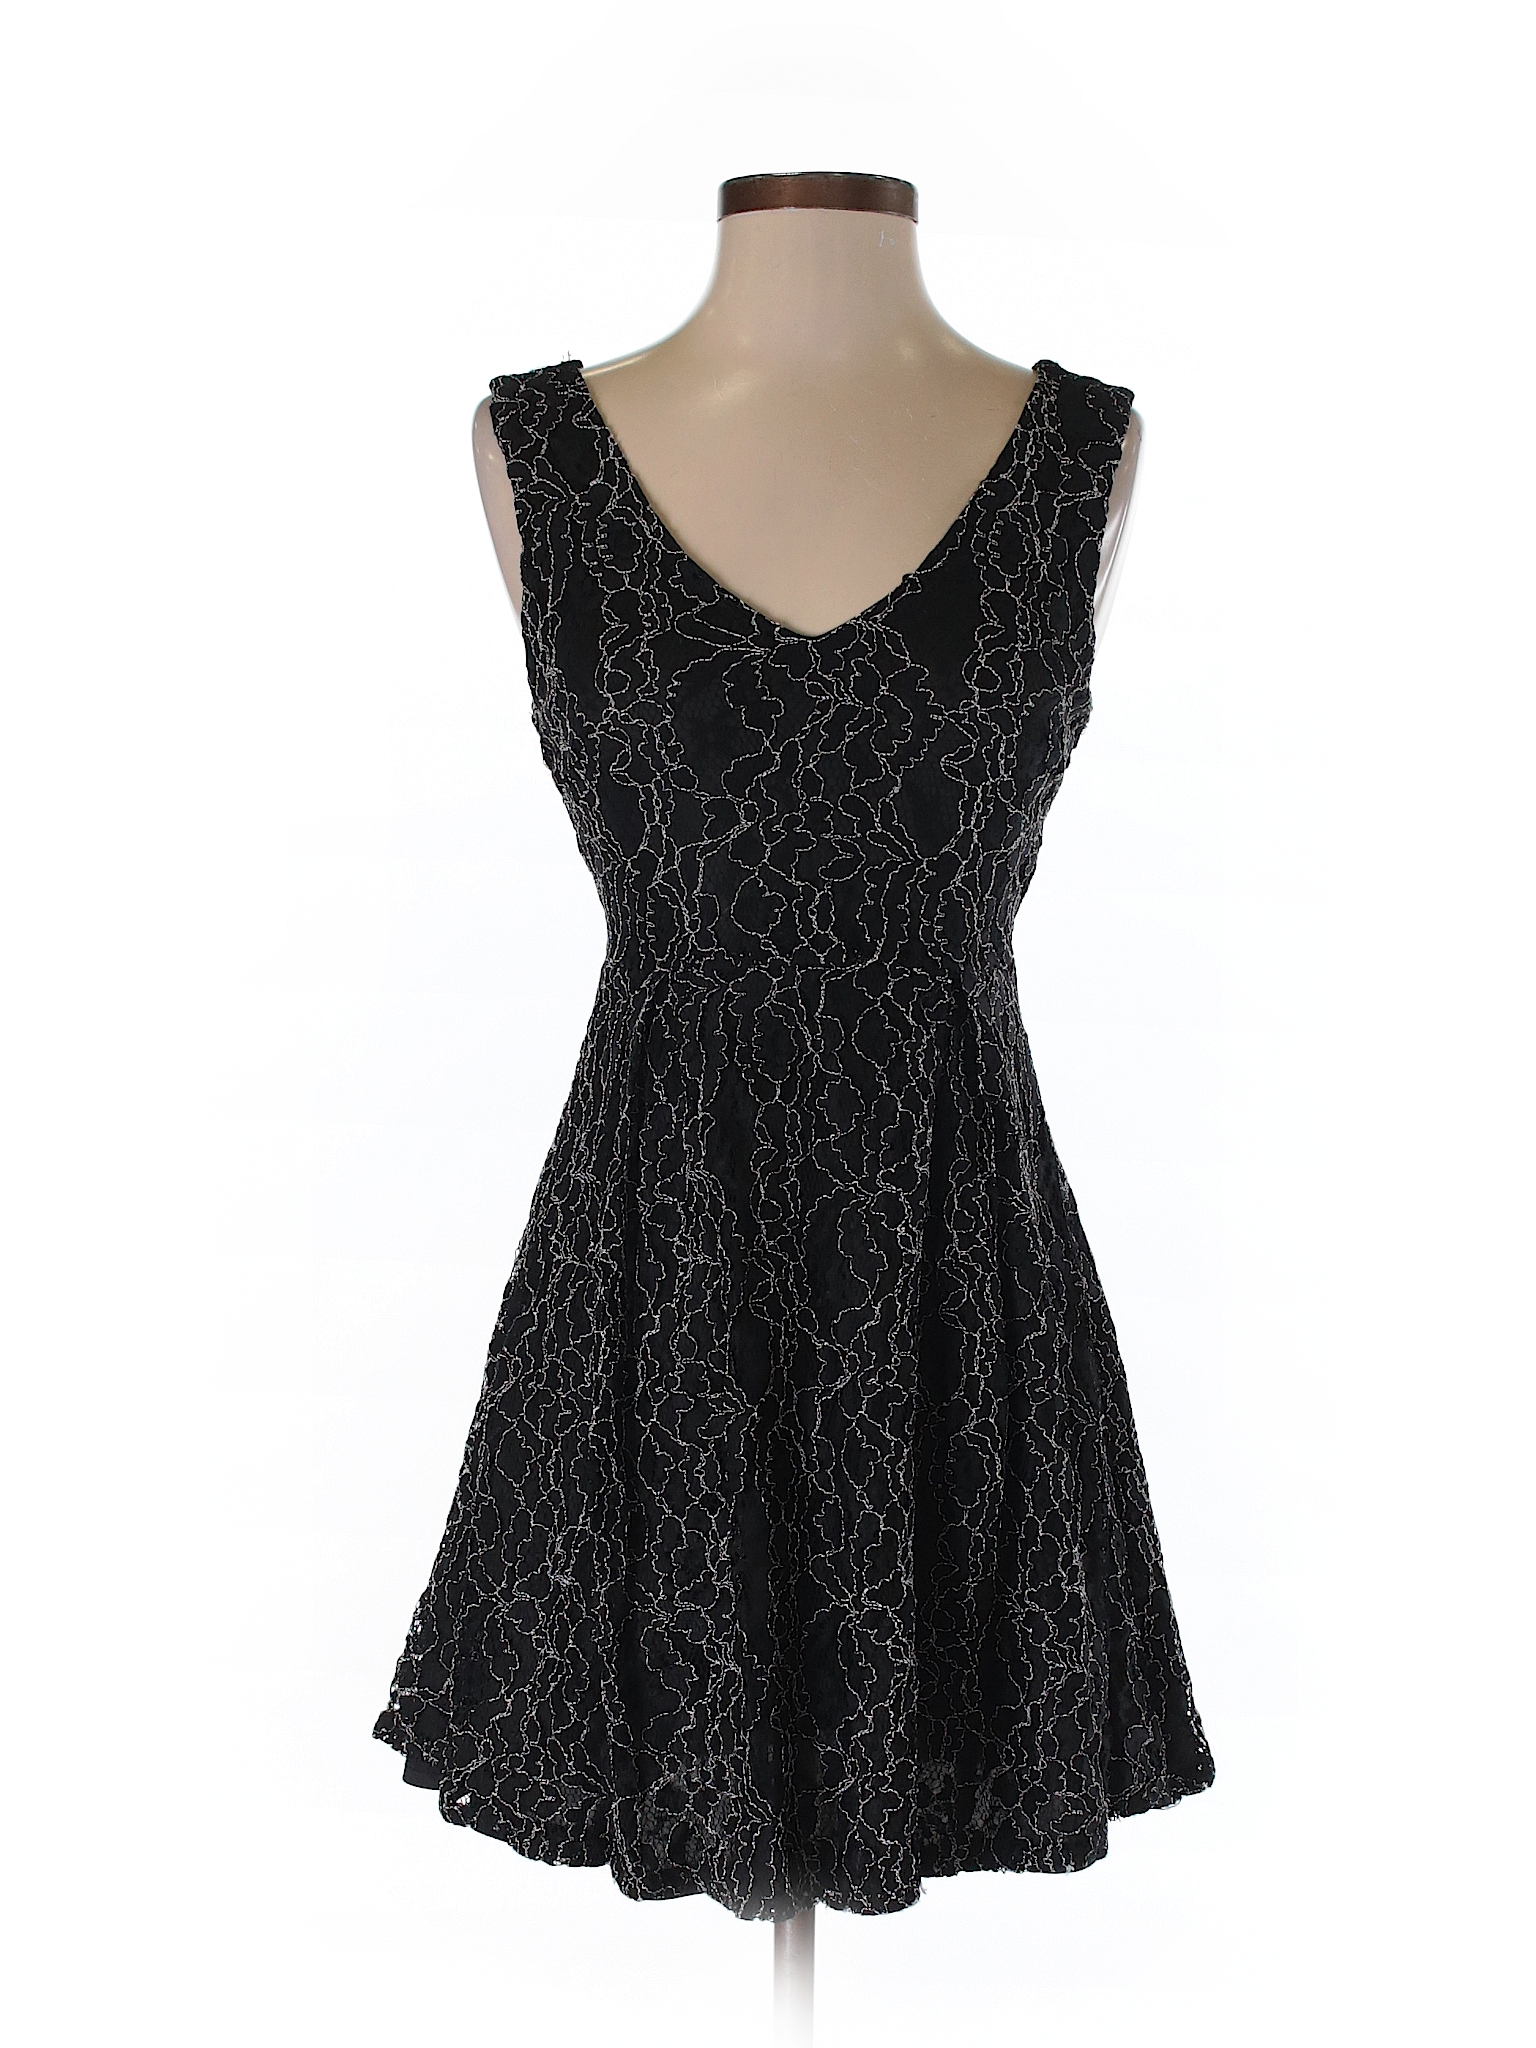 Sienna Sky 100% Polyester Print Black Casual Dress Size S - 75% off ...